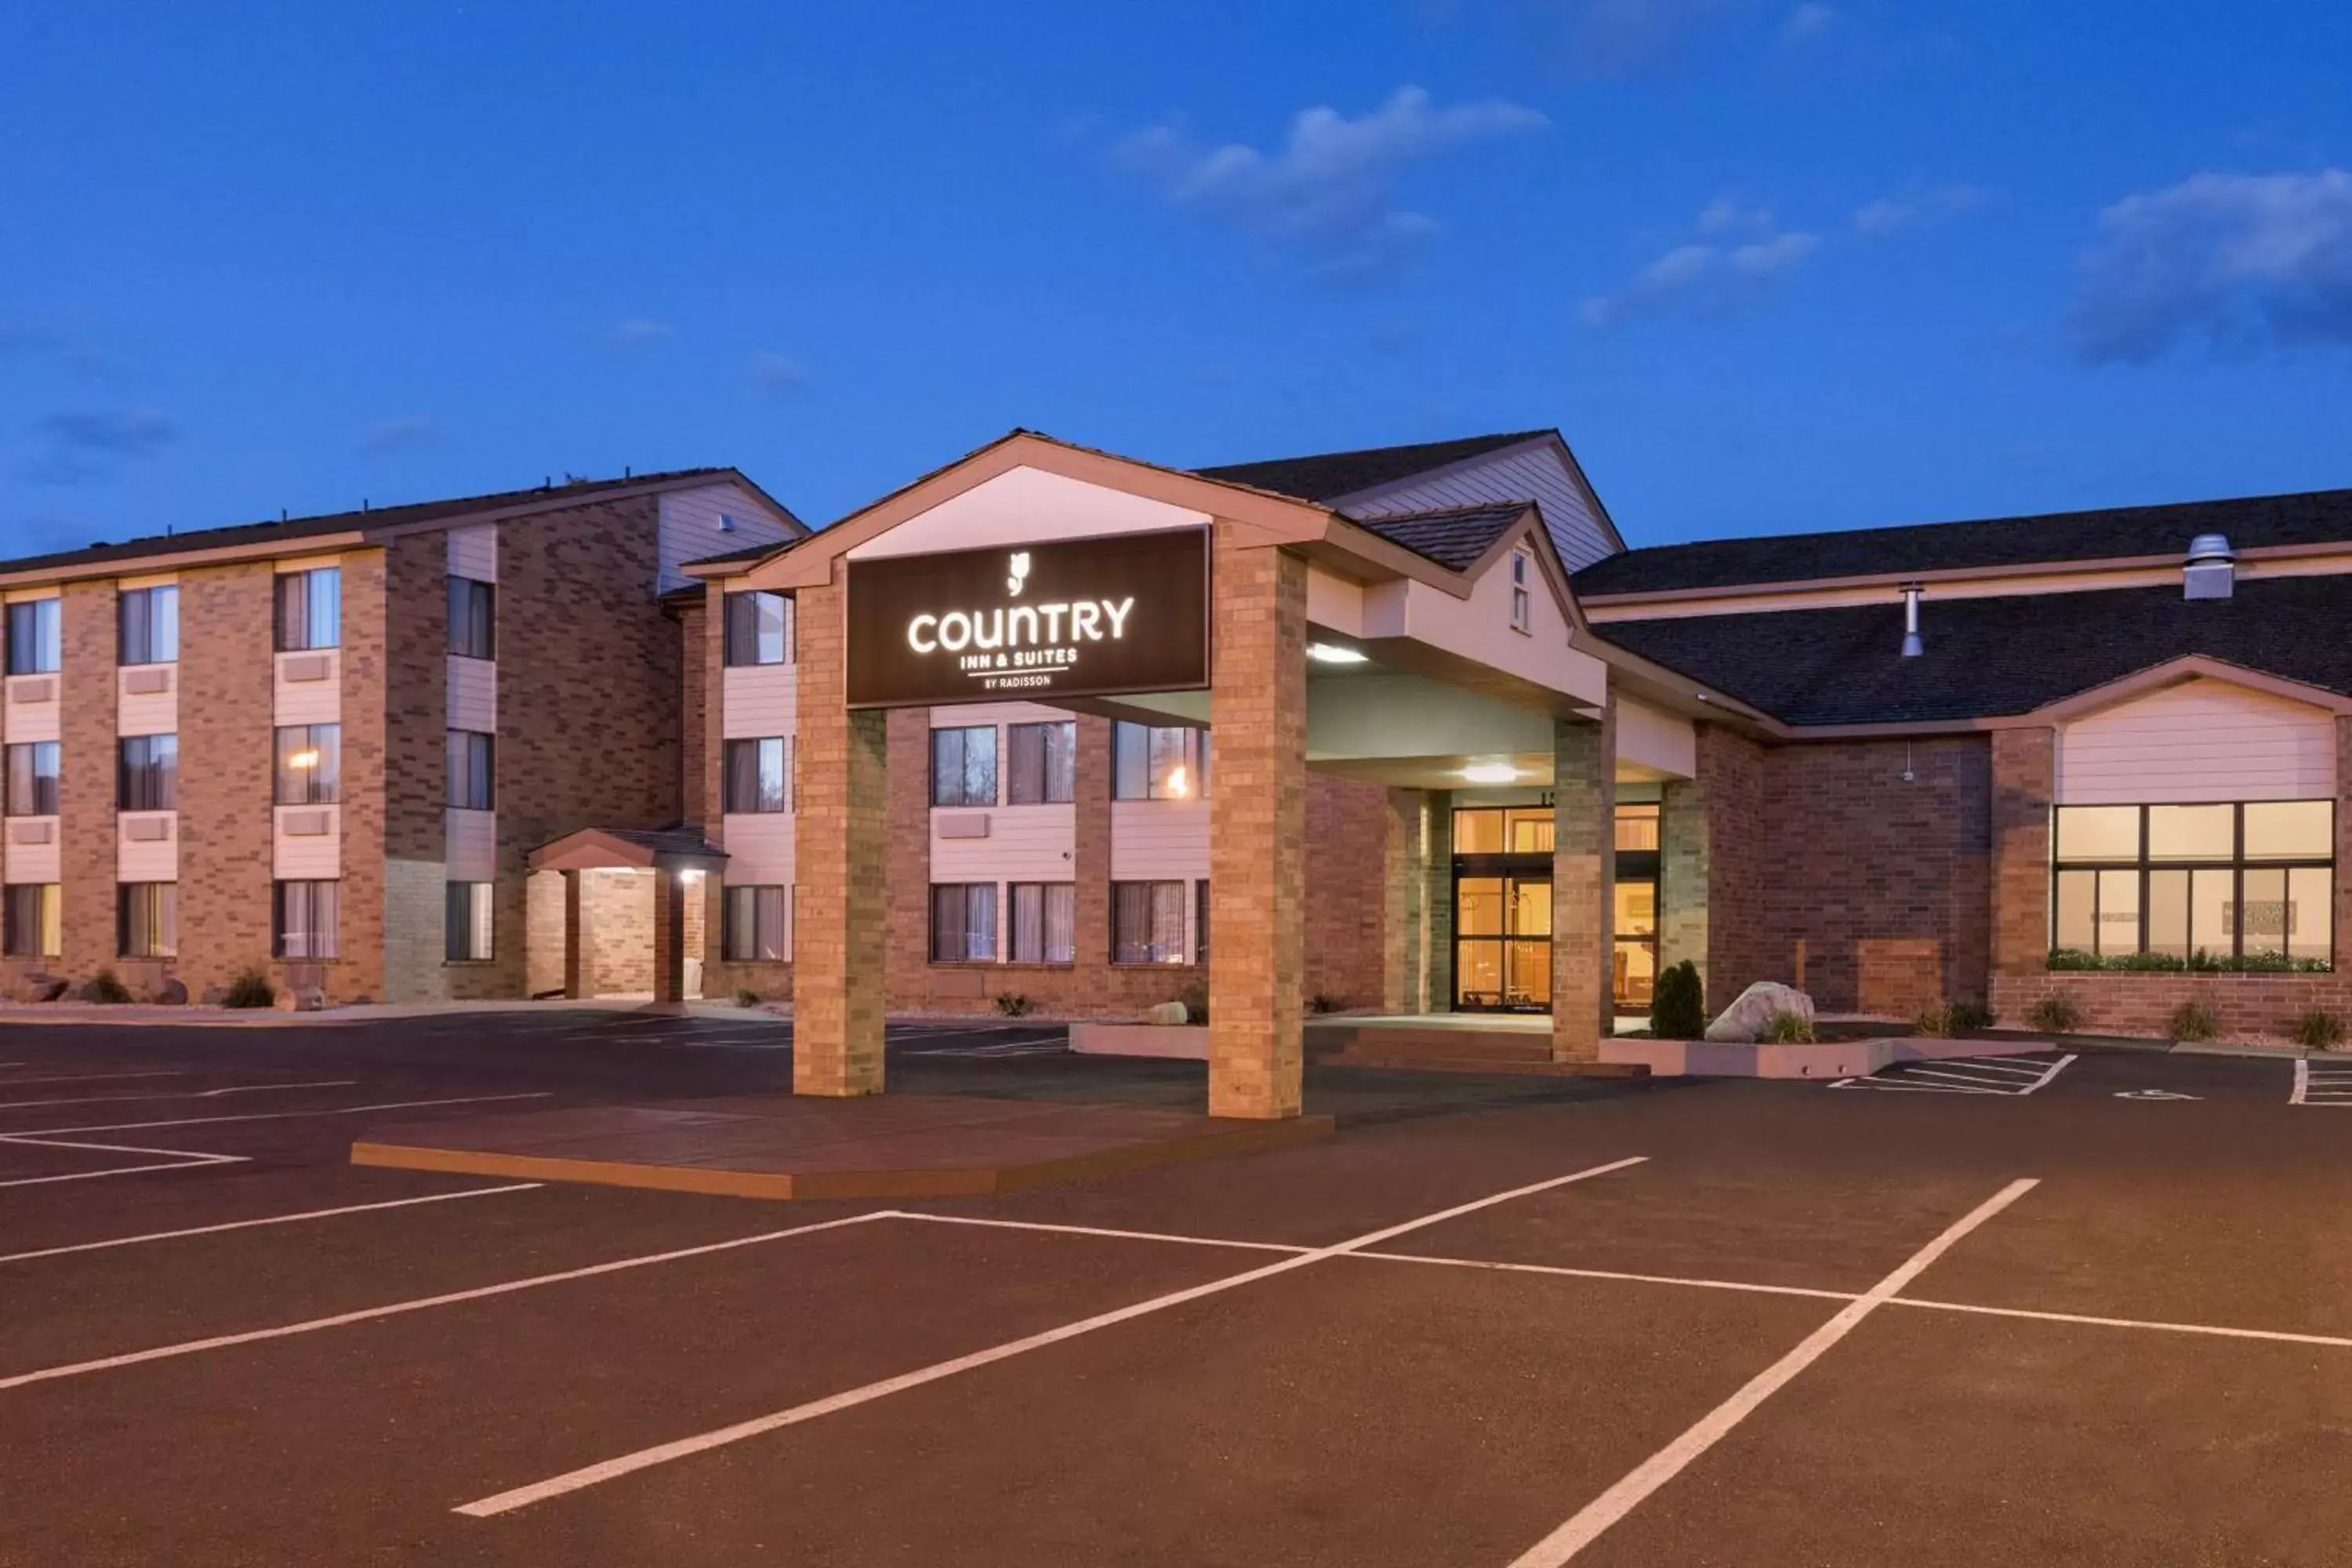 Property building in Country Inn & Suites by Radisson, Coon Rapids, MN